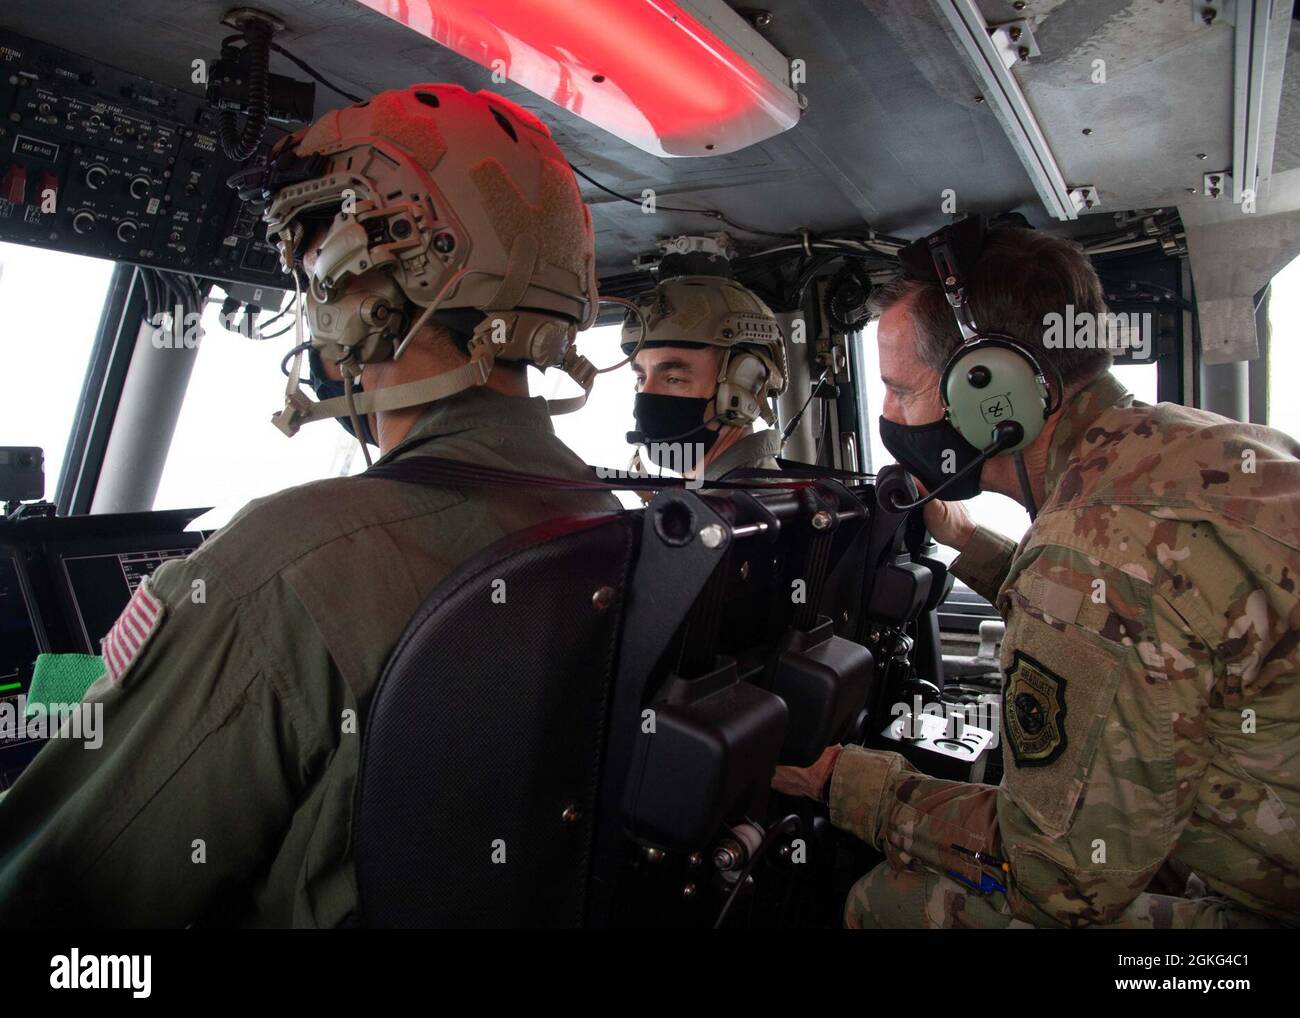 SASEBO, Japan (April 14, 2021) – U.S. Forces Japan Lt. Gen. Kevin Schneider receives a demonstration flight of a landing craft, air cushion (LCAC) from Chief Aviation Machinist’s Mate Anthony Theel, assigned to Naval Beach Unit Seven, onboard Commander, Fleet Activities Sasebo April 14, 2021. Schneider visited Sasebo to review CFAS’ contributions to U.S. Forces Japan’s mission and meet with local U.S. Navy leaders and Japan Self-Defense Force partners to reaffirm the U.S.-Japan alliance. Stock Photo